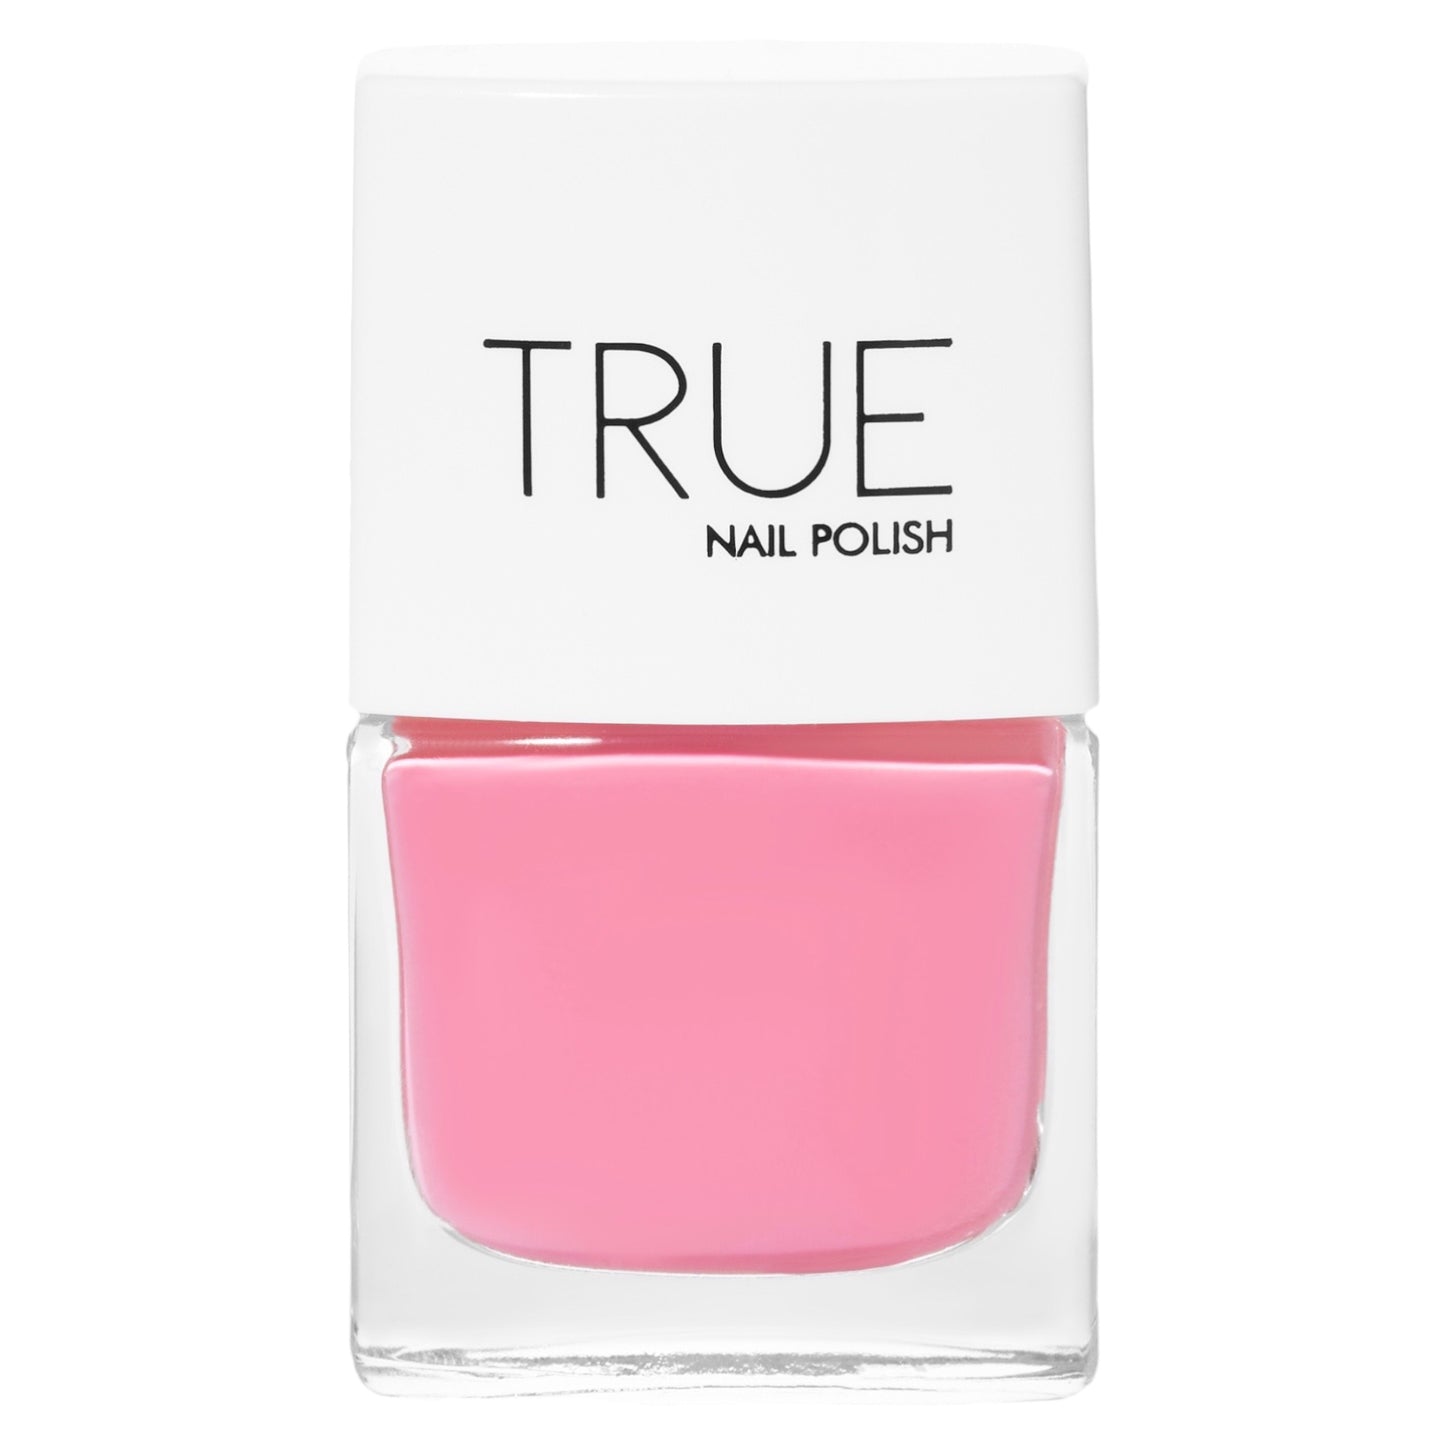 A bottle of Aloha, a bright pink shade from True Nail Polish